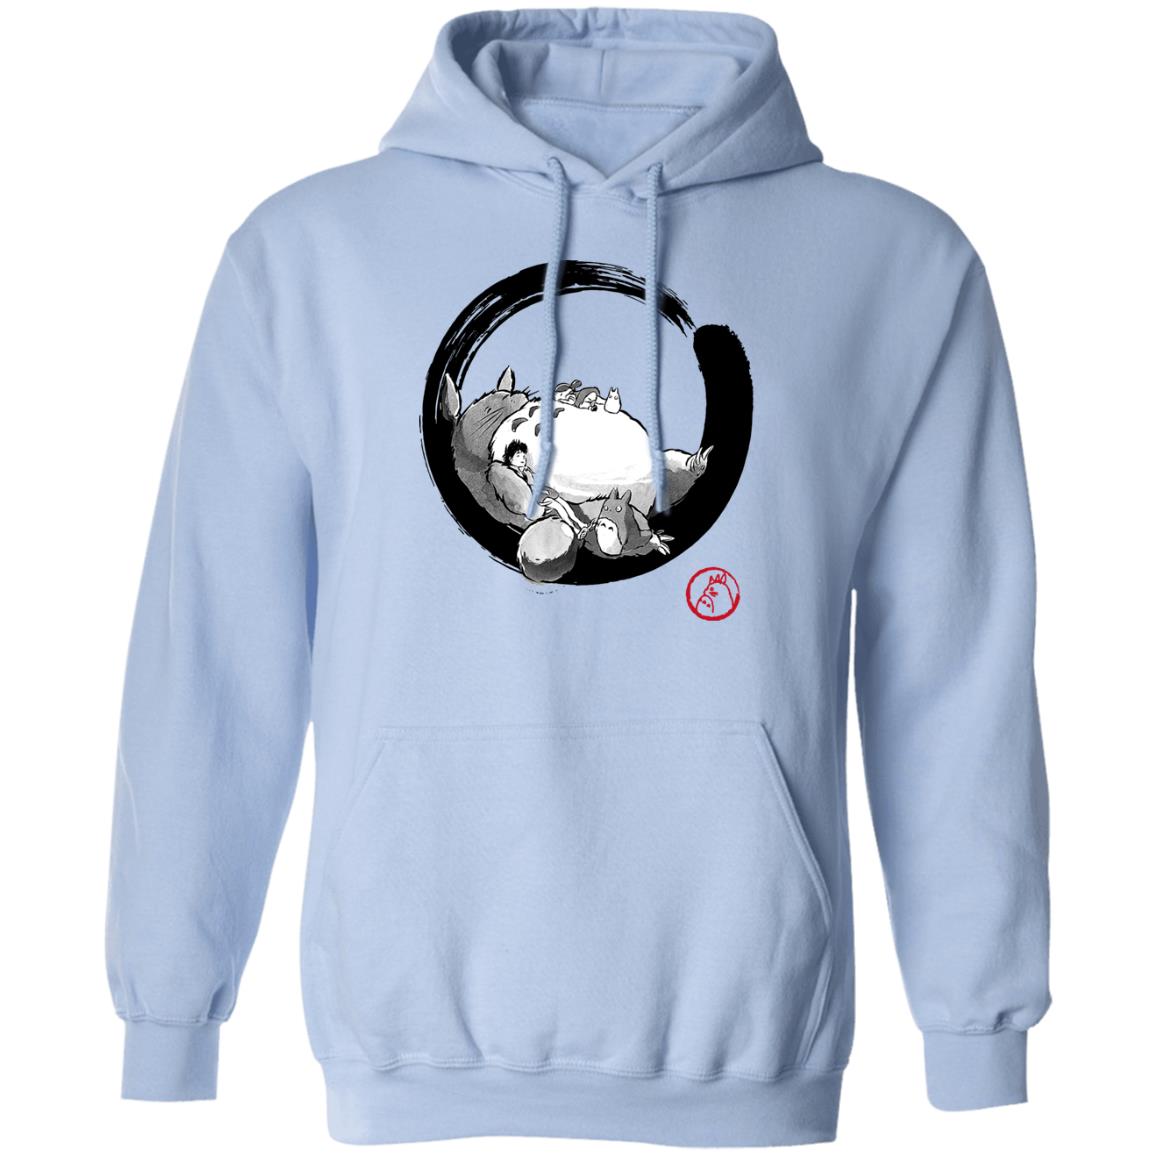 Totoro Family and the Girls in Black and White Hoodie